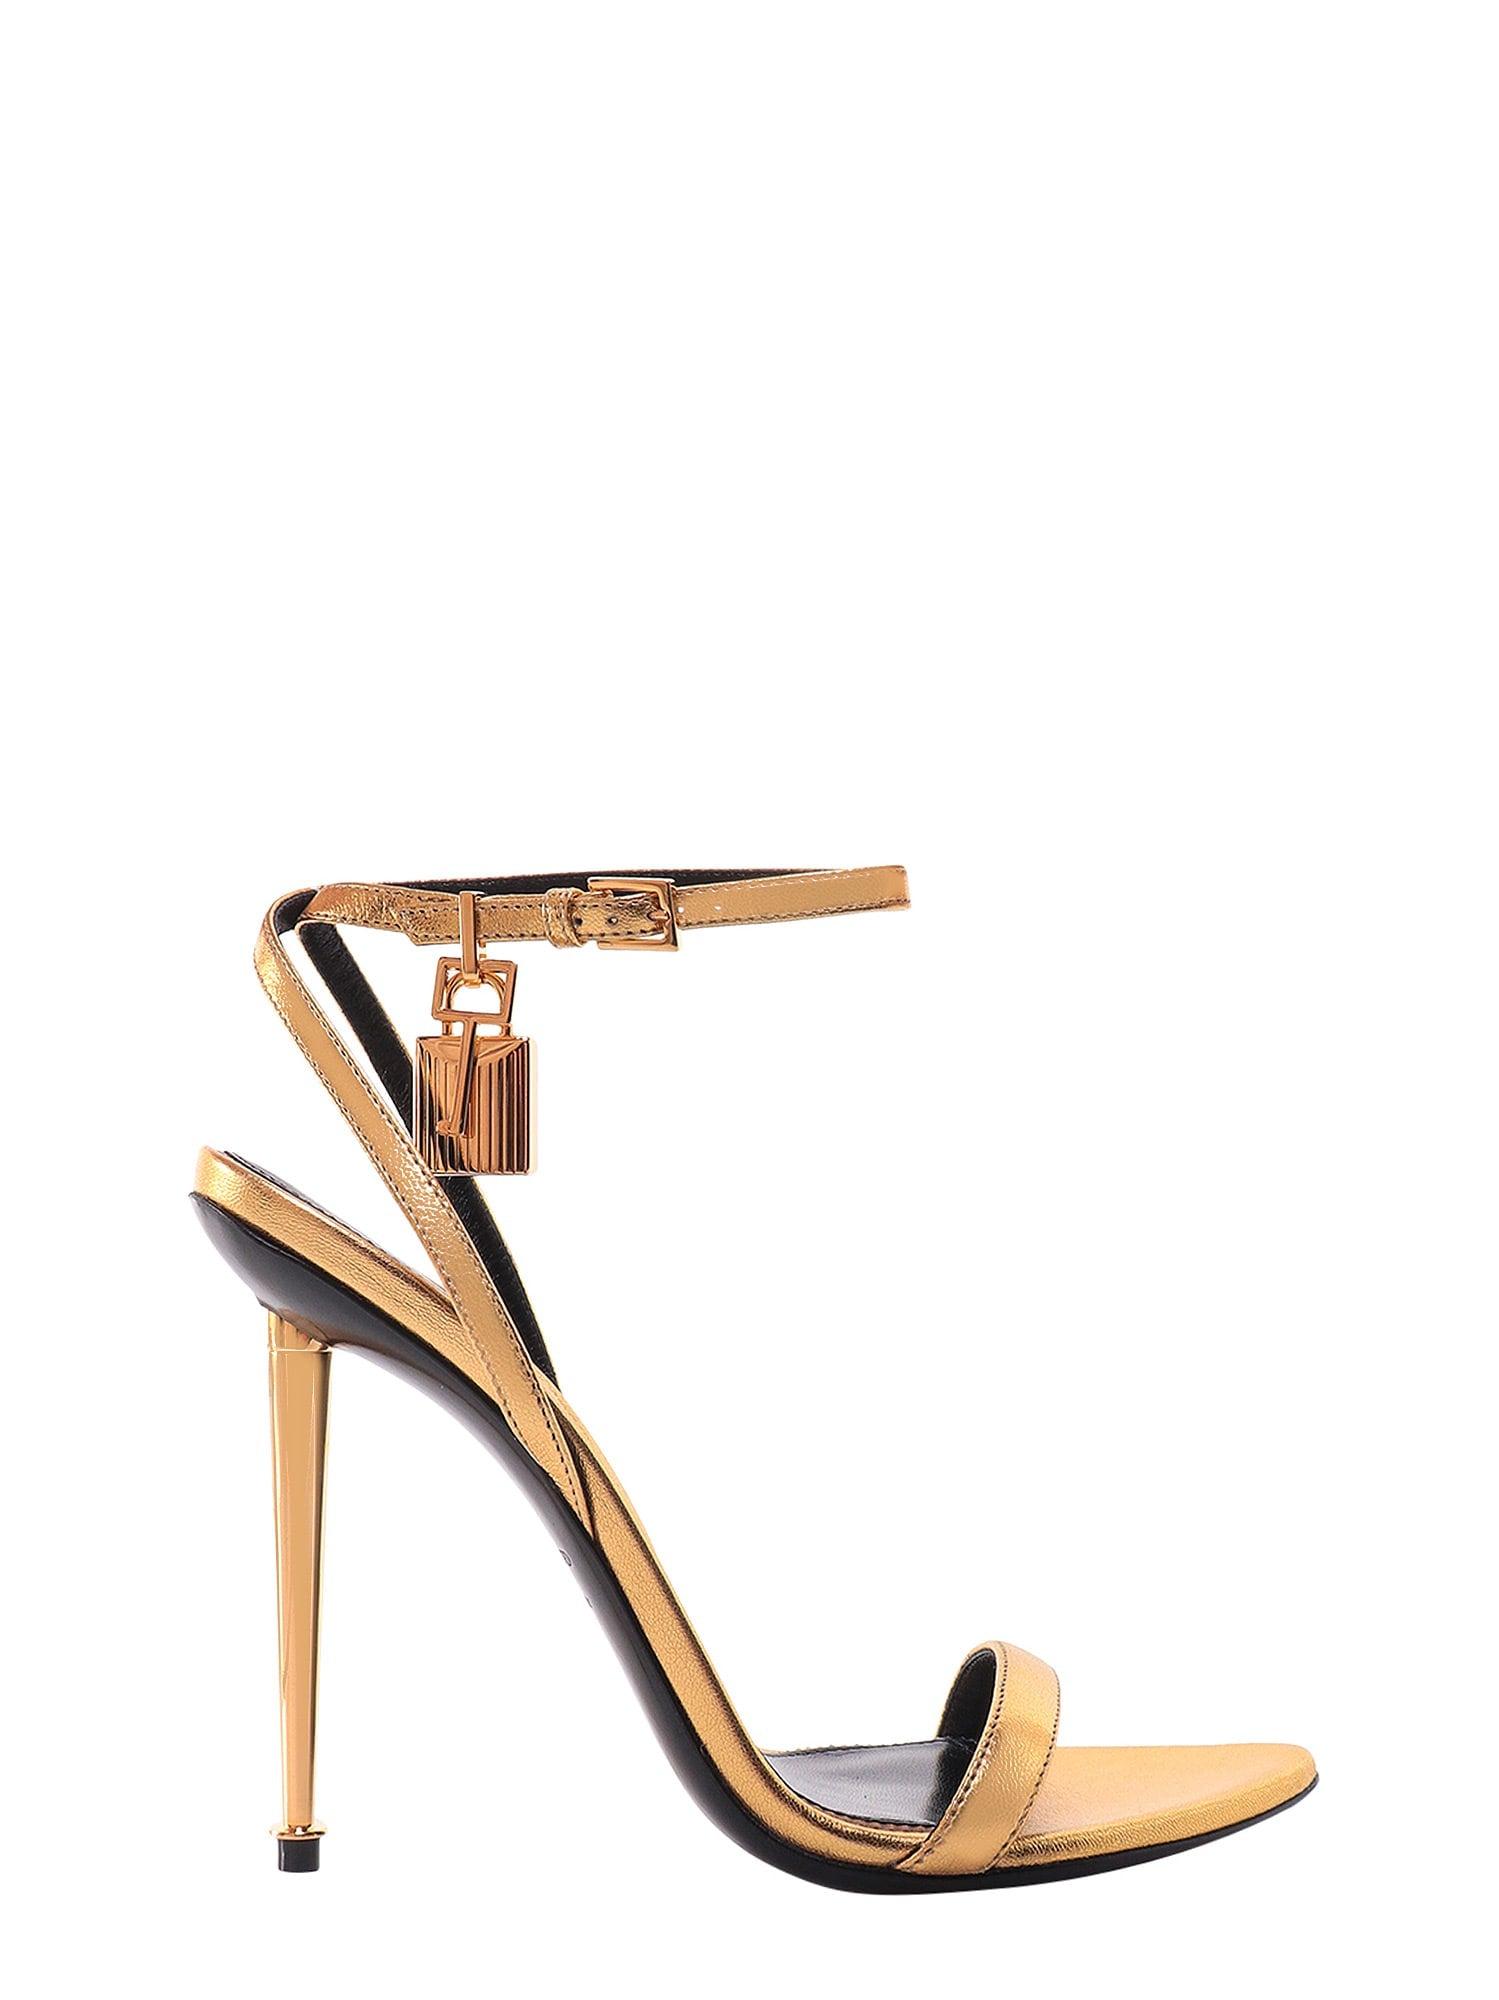 Tom Ford Padlock Pointy Sandals in Metallic | Lyst